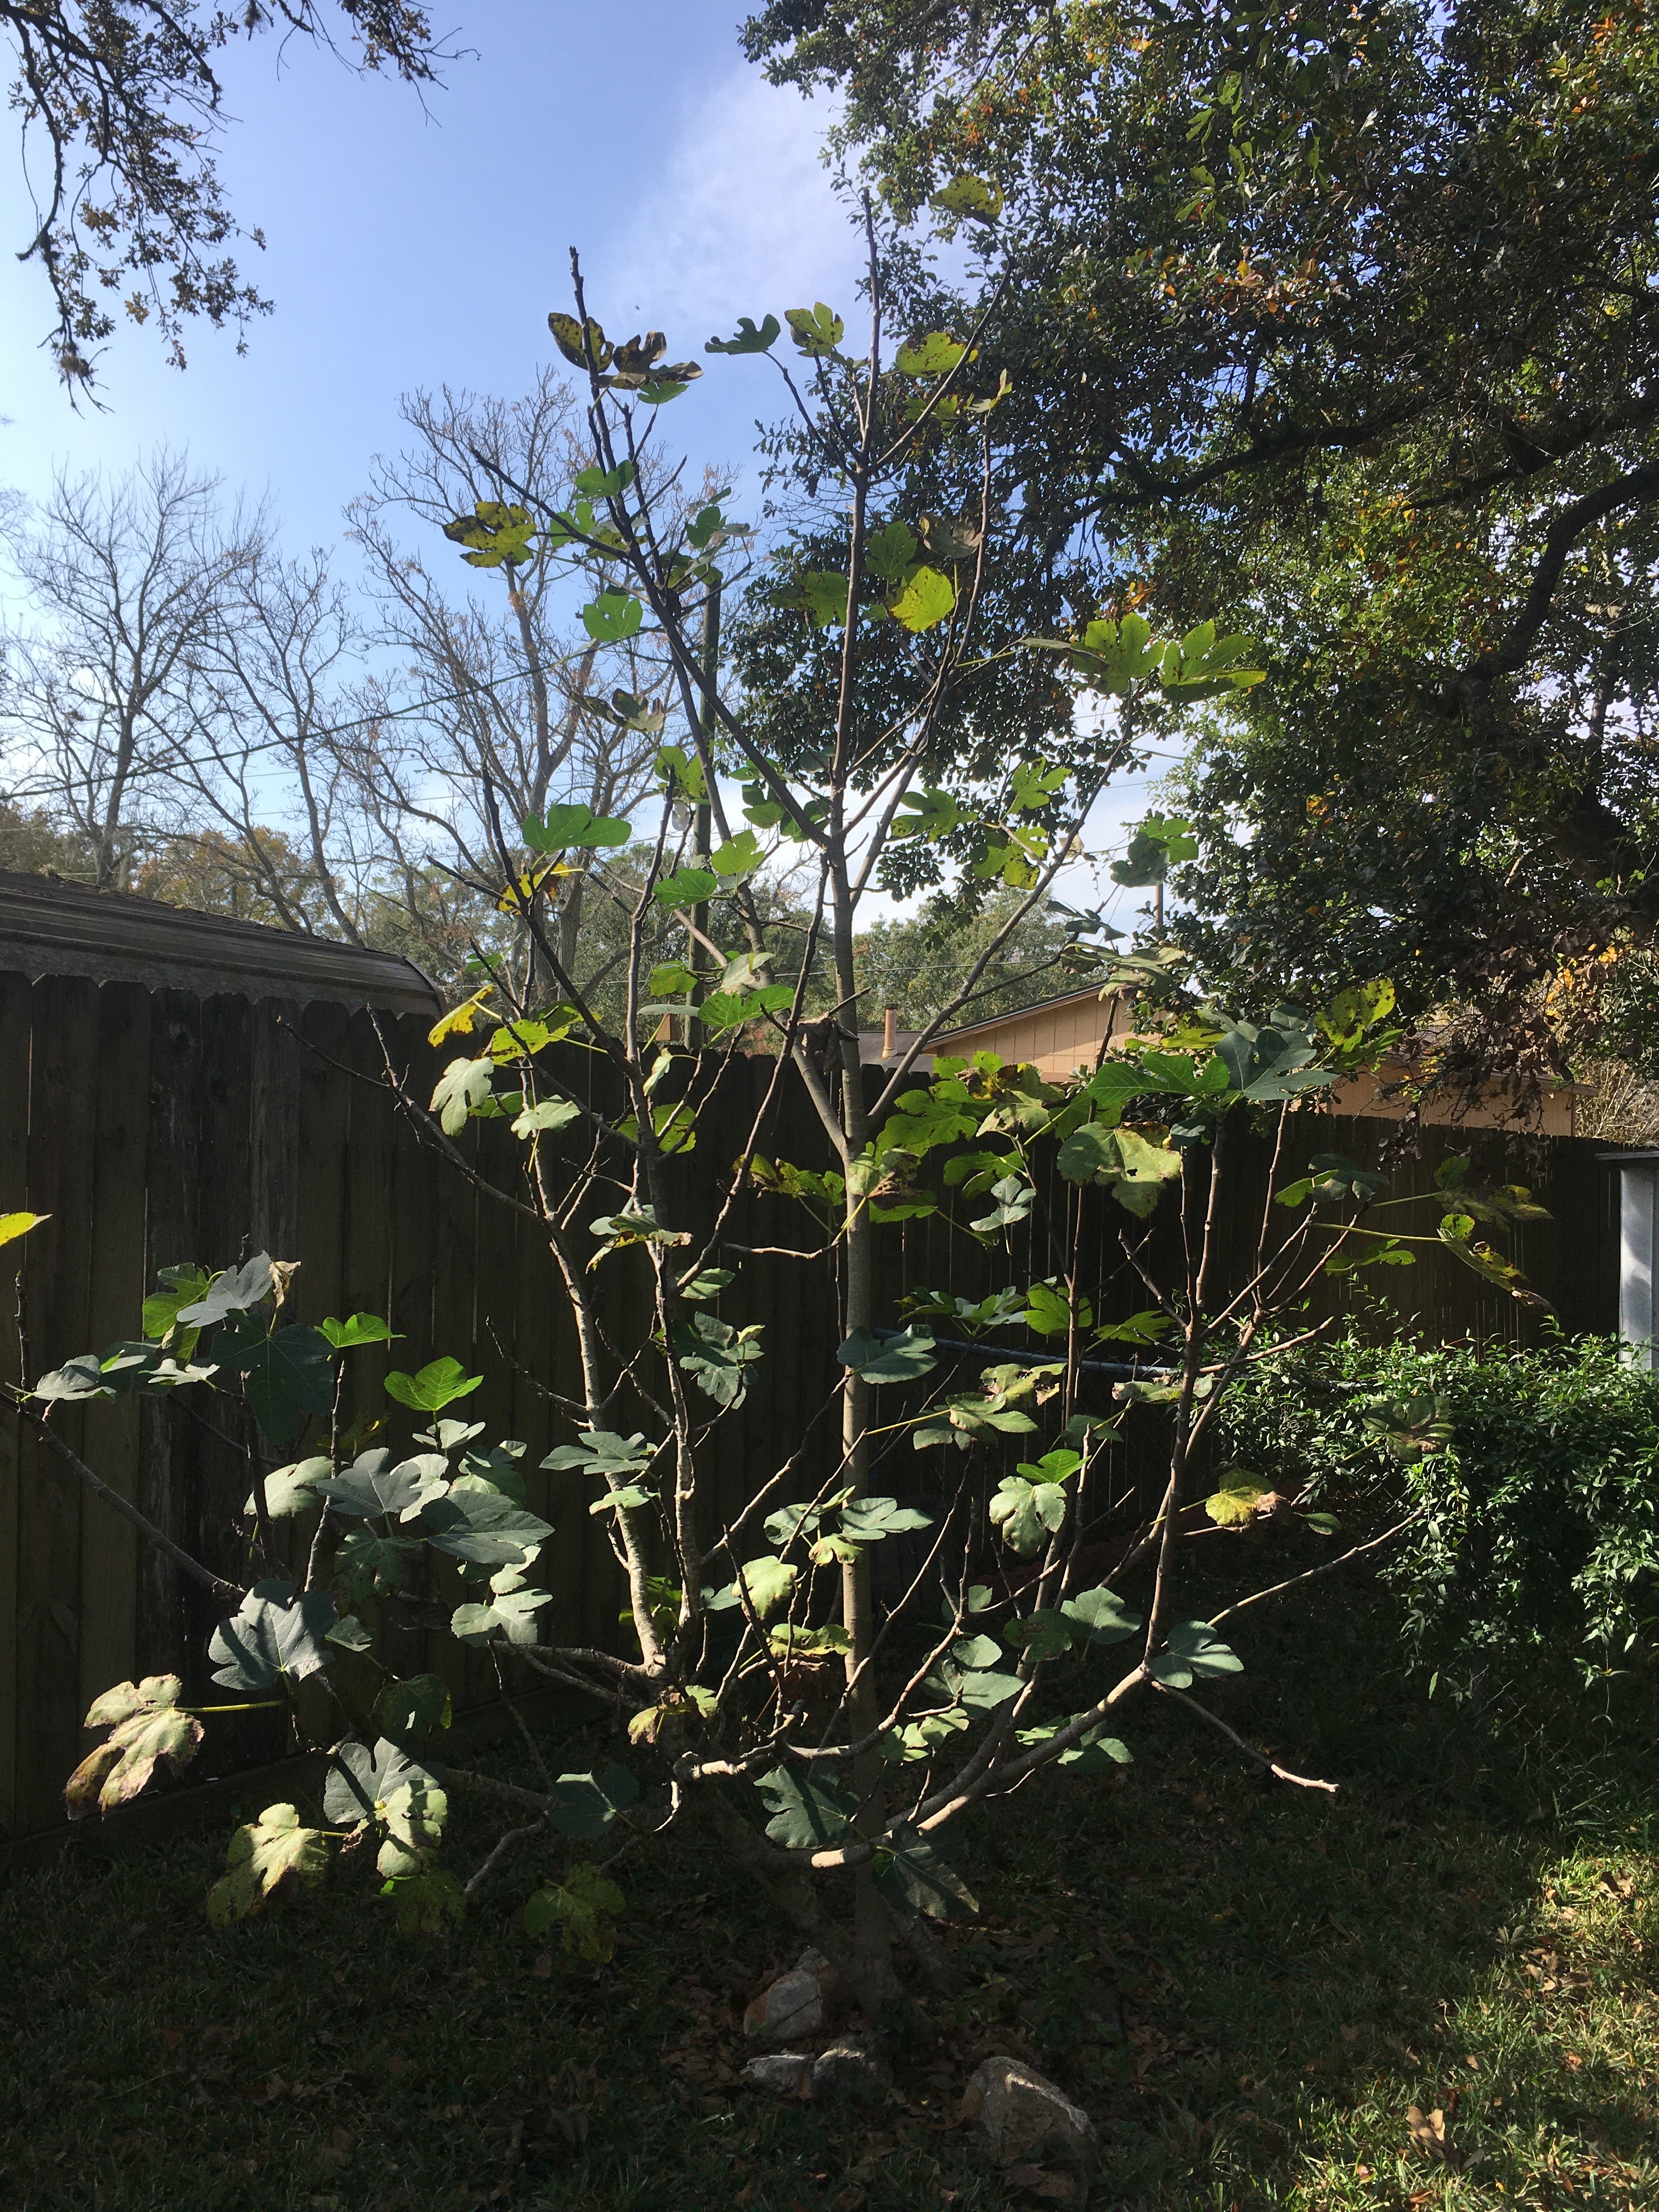 update of large fig tree from parent's house on November 27th, 2019